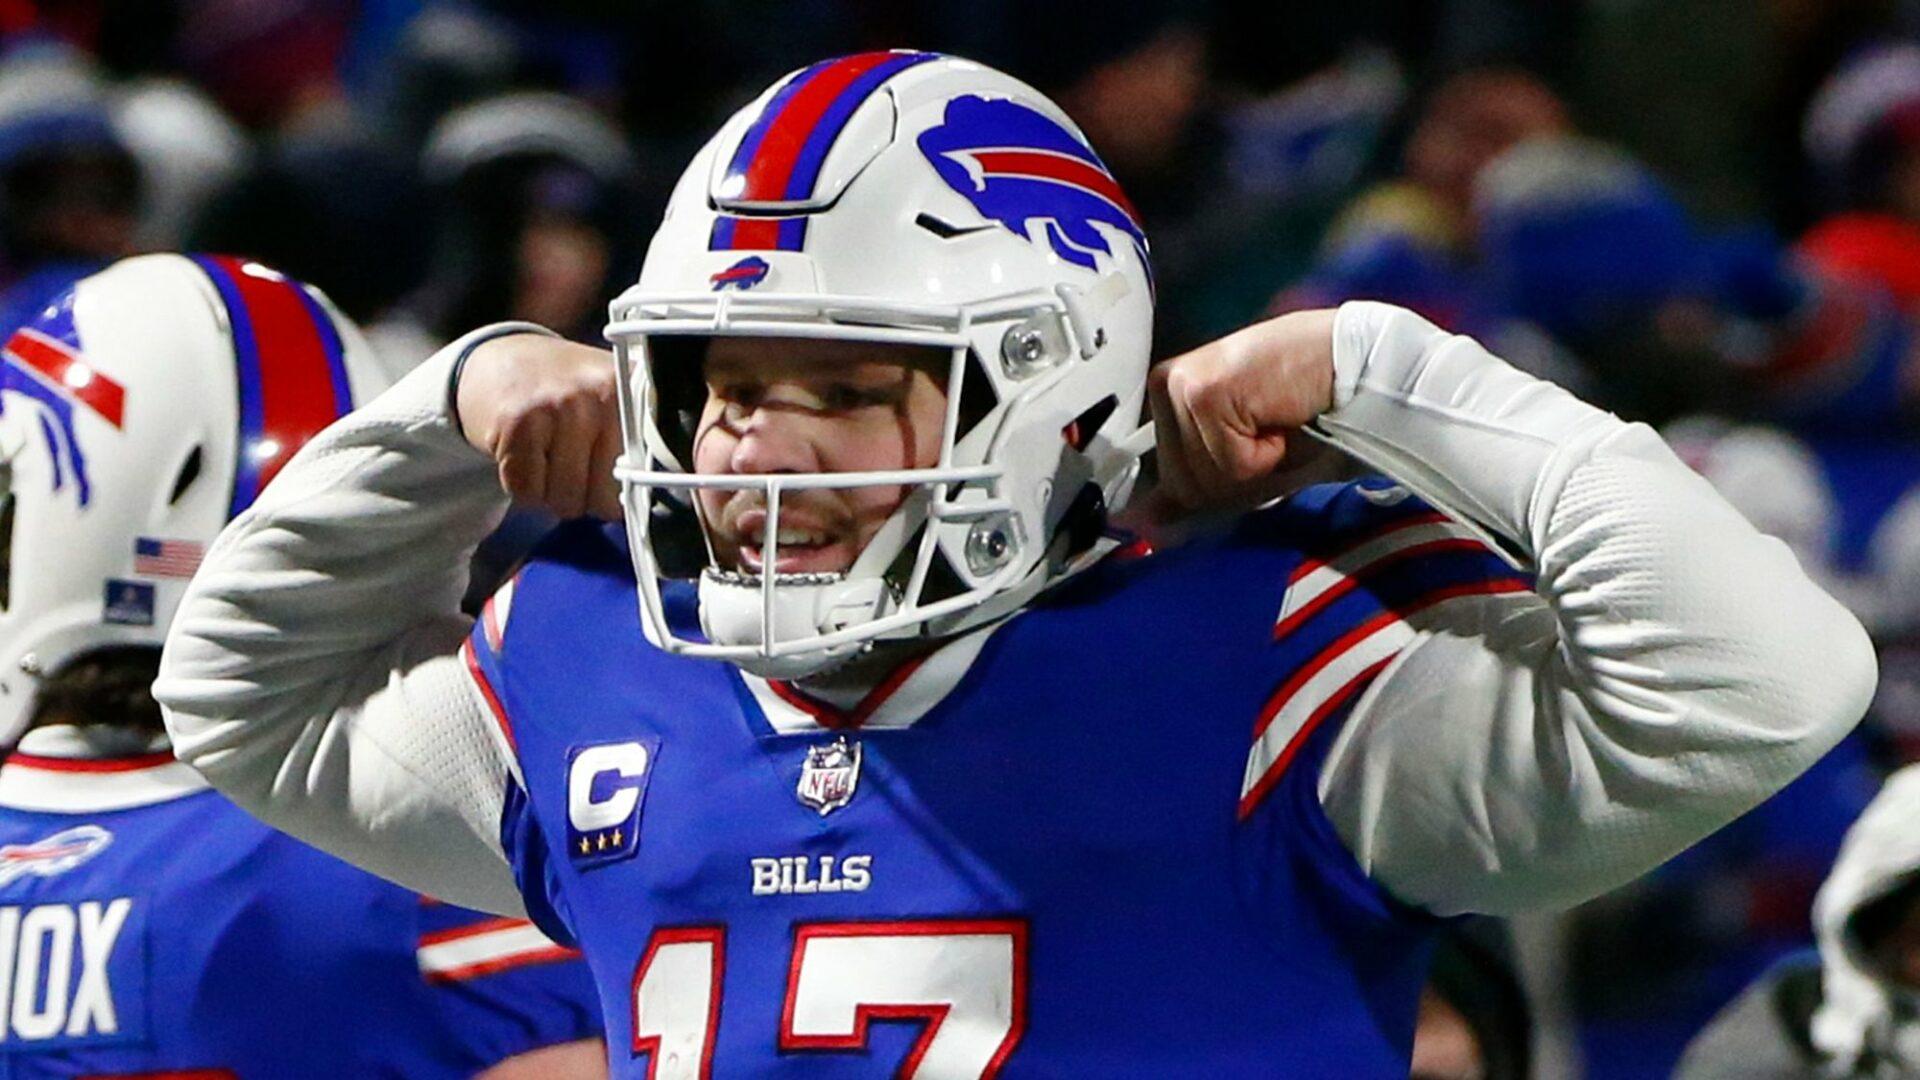 NFL Predictions Against the Spread Week 14: Can Bills upset the Steelers?